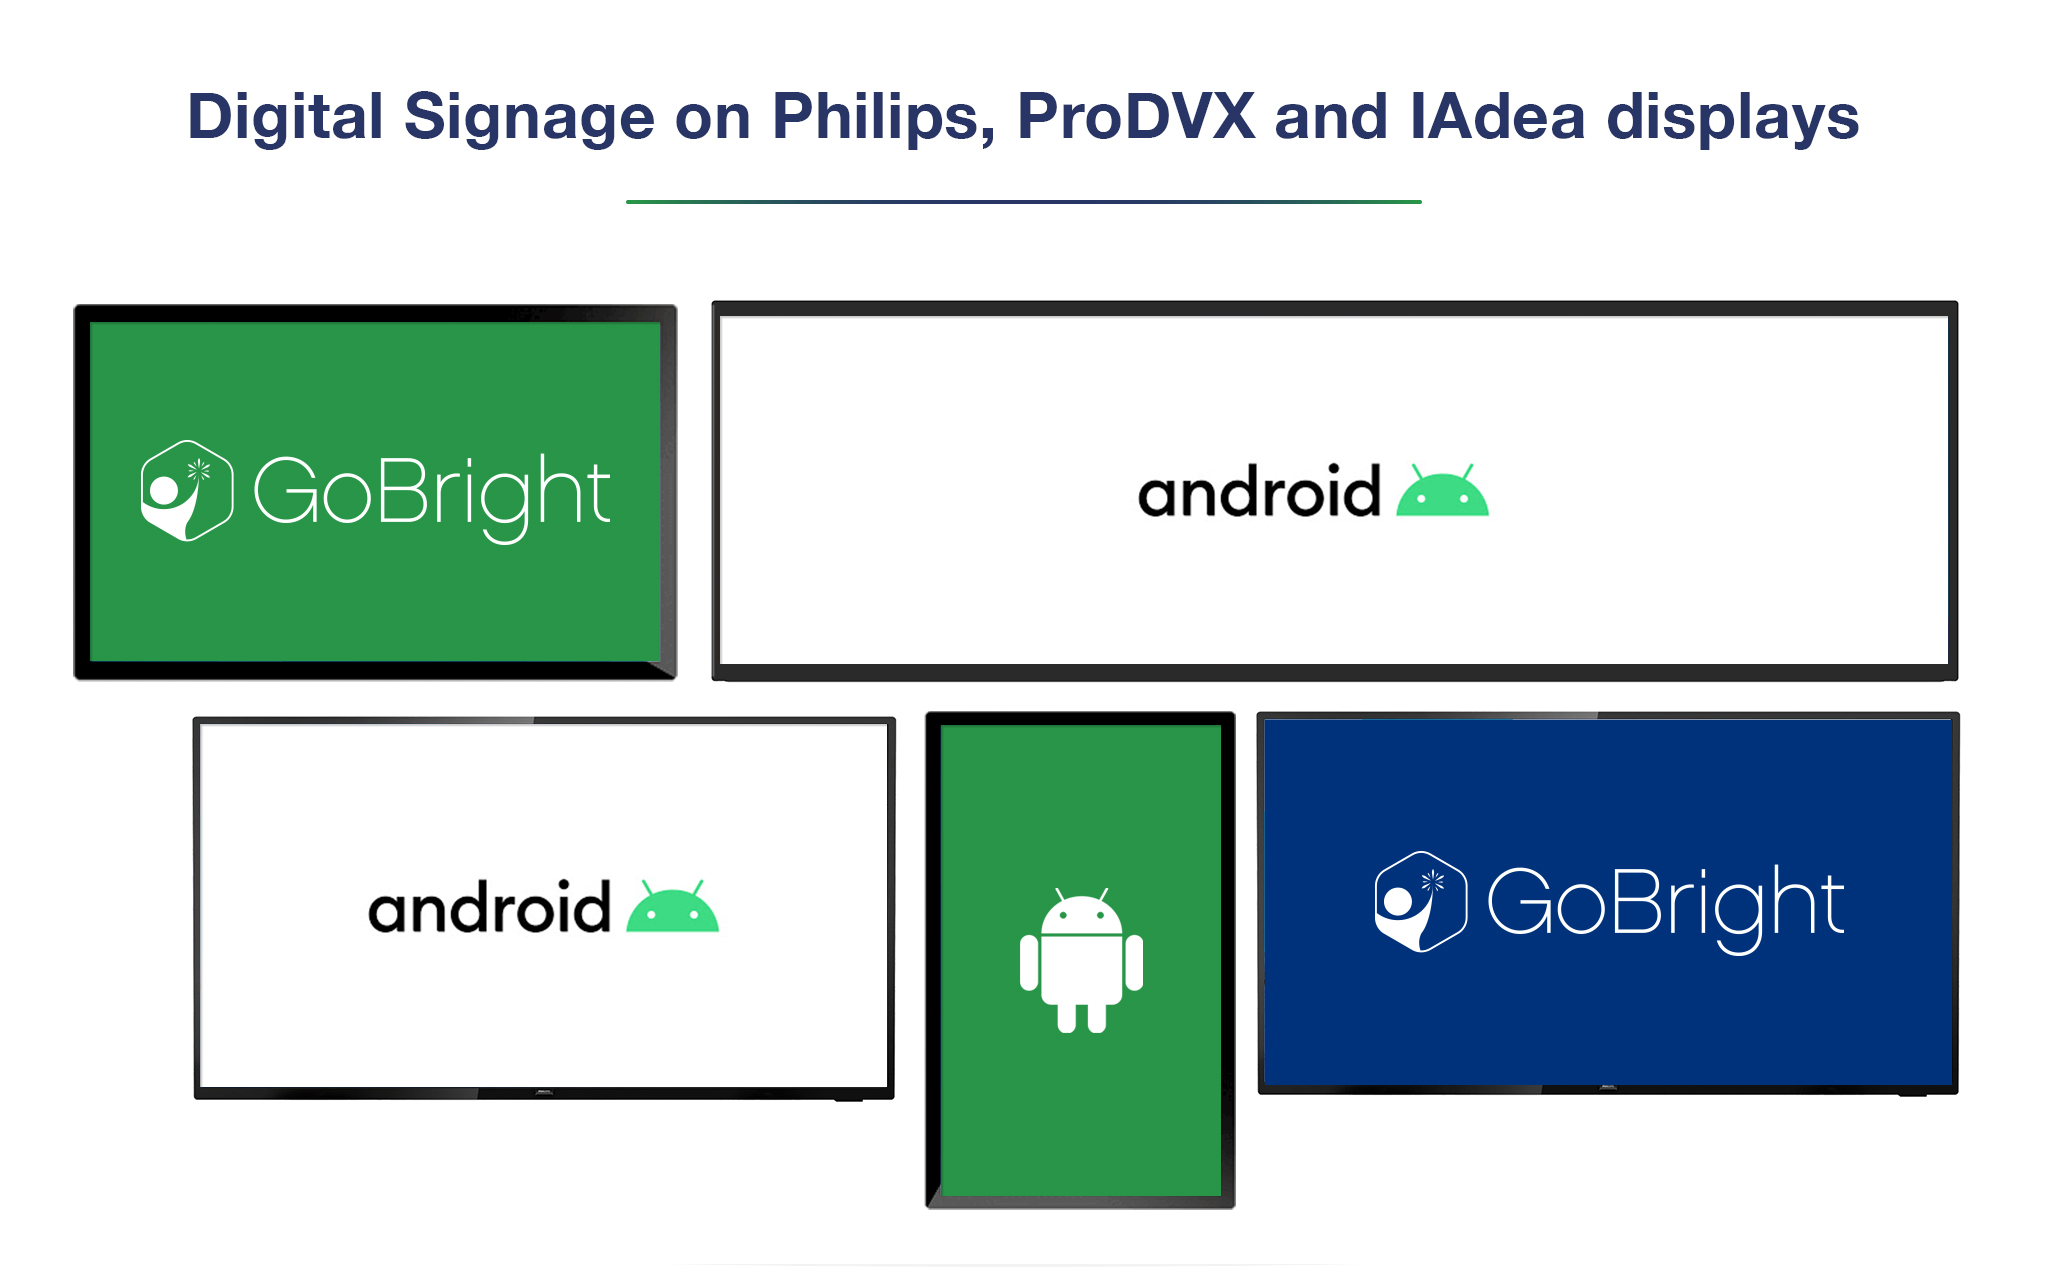 GoBright View on Android Displays